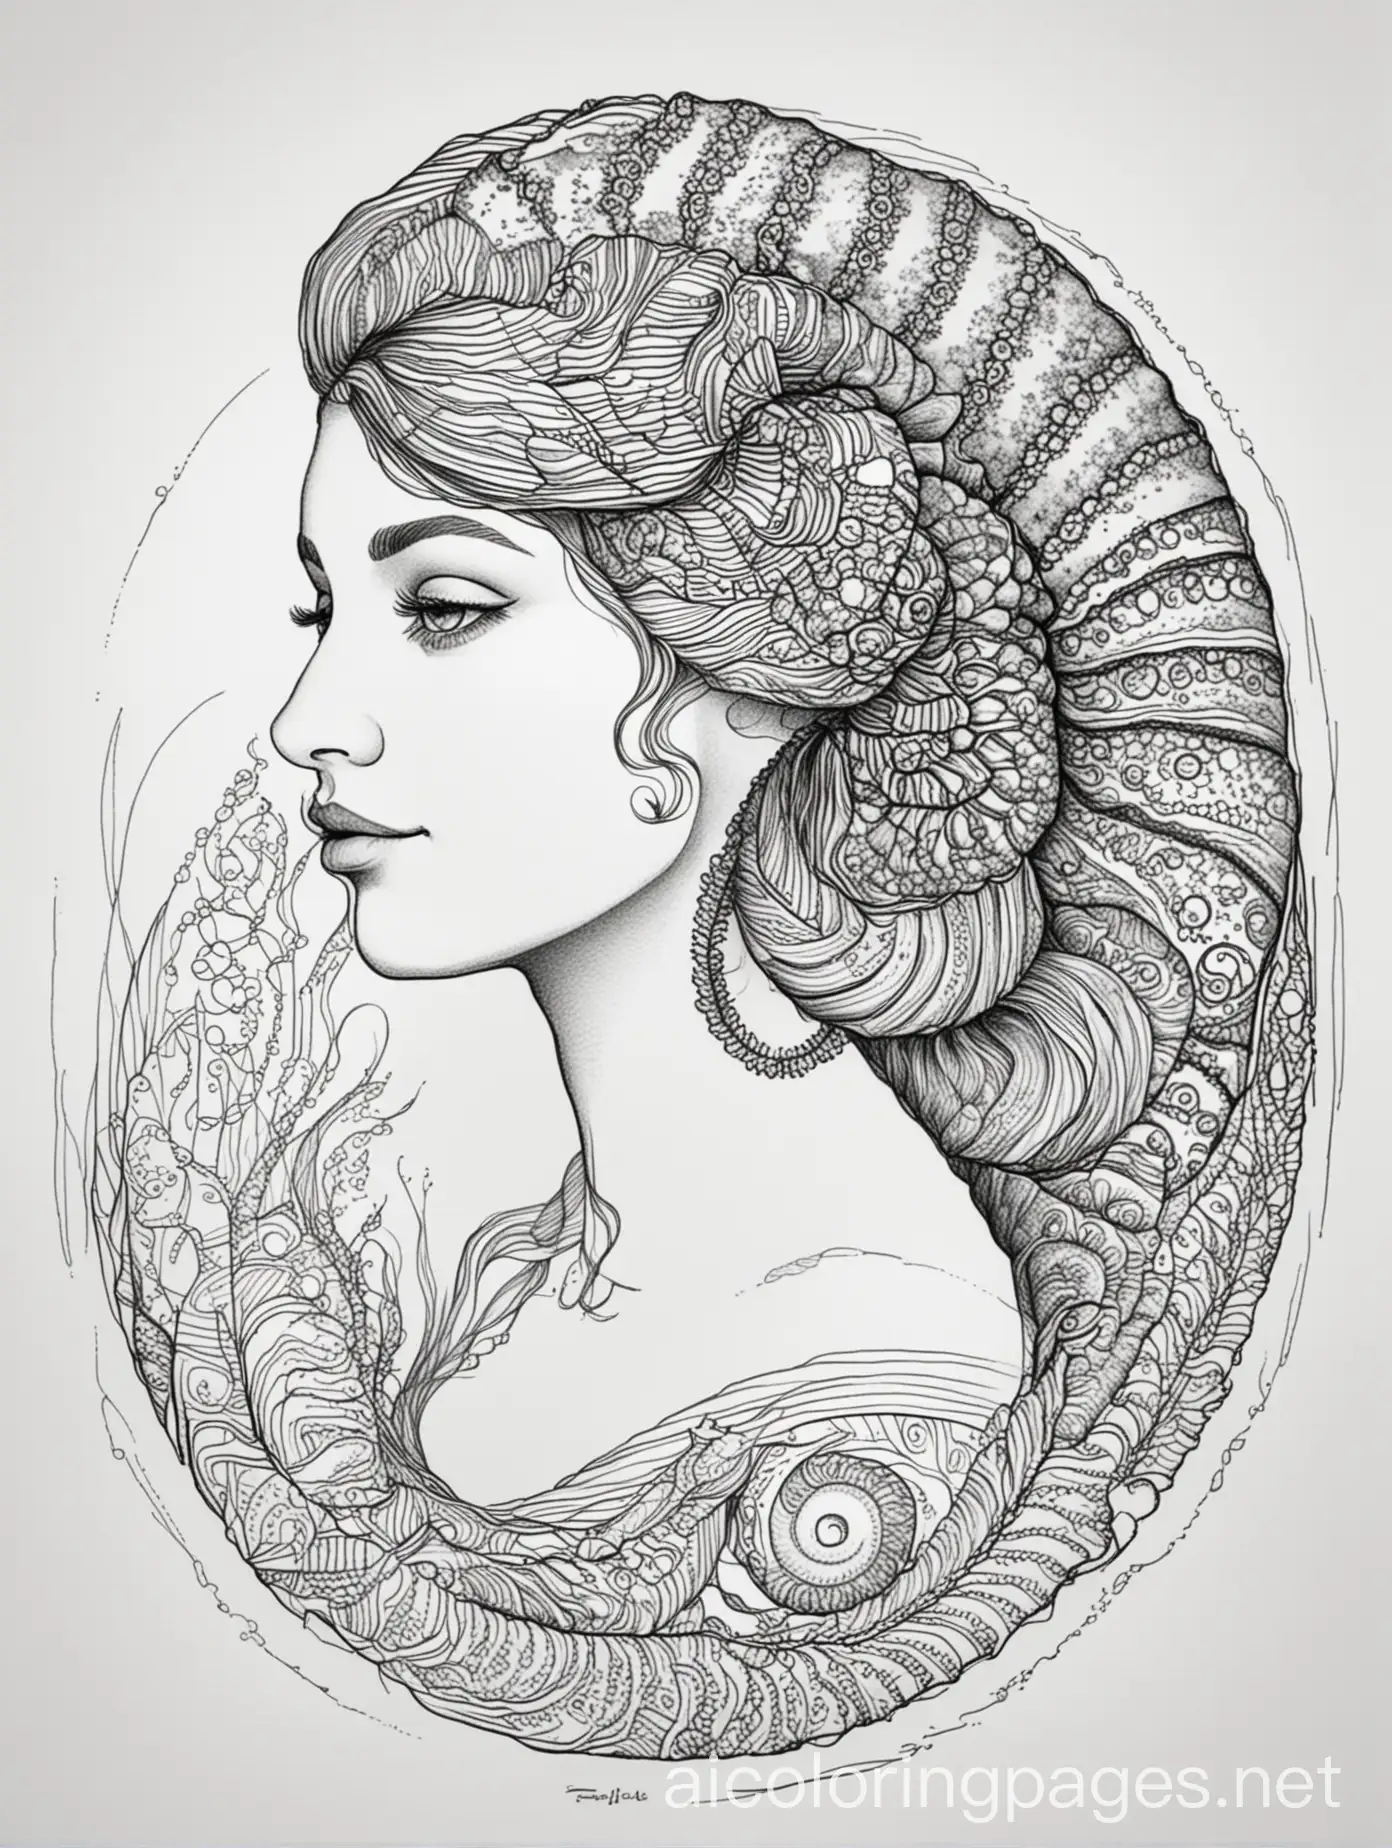 colouring page simple line art beautiful ammonite lady , Coloring Page, black and white, line art, white background, Simplicity, Ample White Space. The background of the coloring page is plain white to make it easy for young children to color within the lines. The outlines of all the subjects are easy to distinguish, making it simple for kids to color without too much difficulty